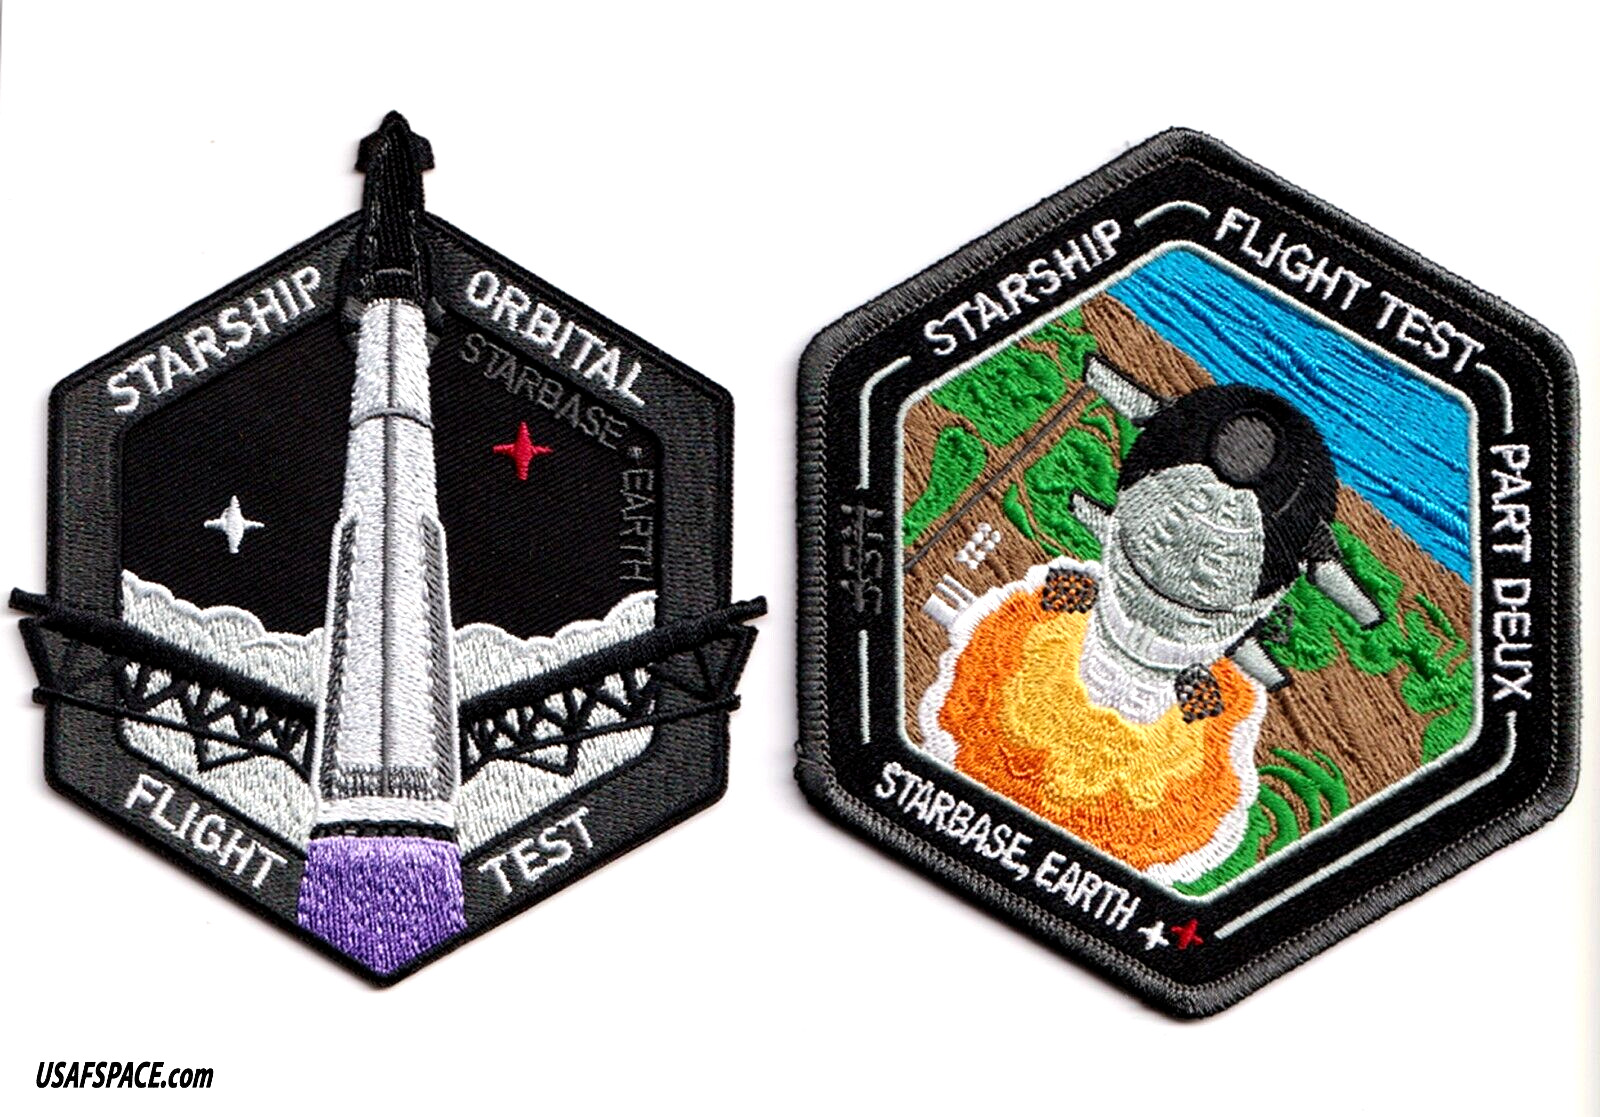 Authentic STARSHIP FLIGHT TEST -1 & 2- SPACEX -STARBASE, EARTH Launch PATCH SET